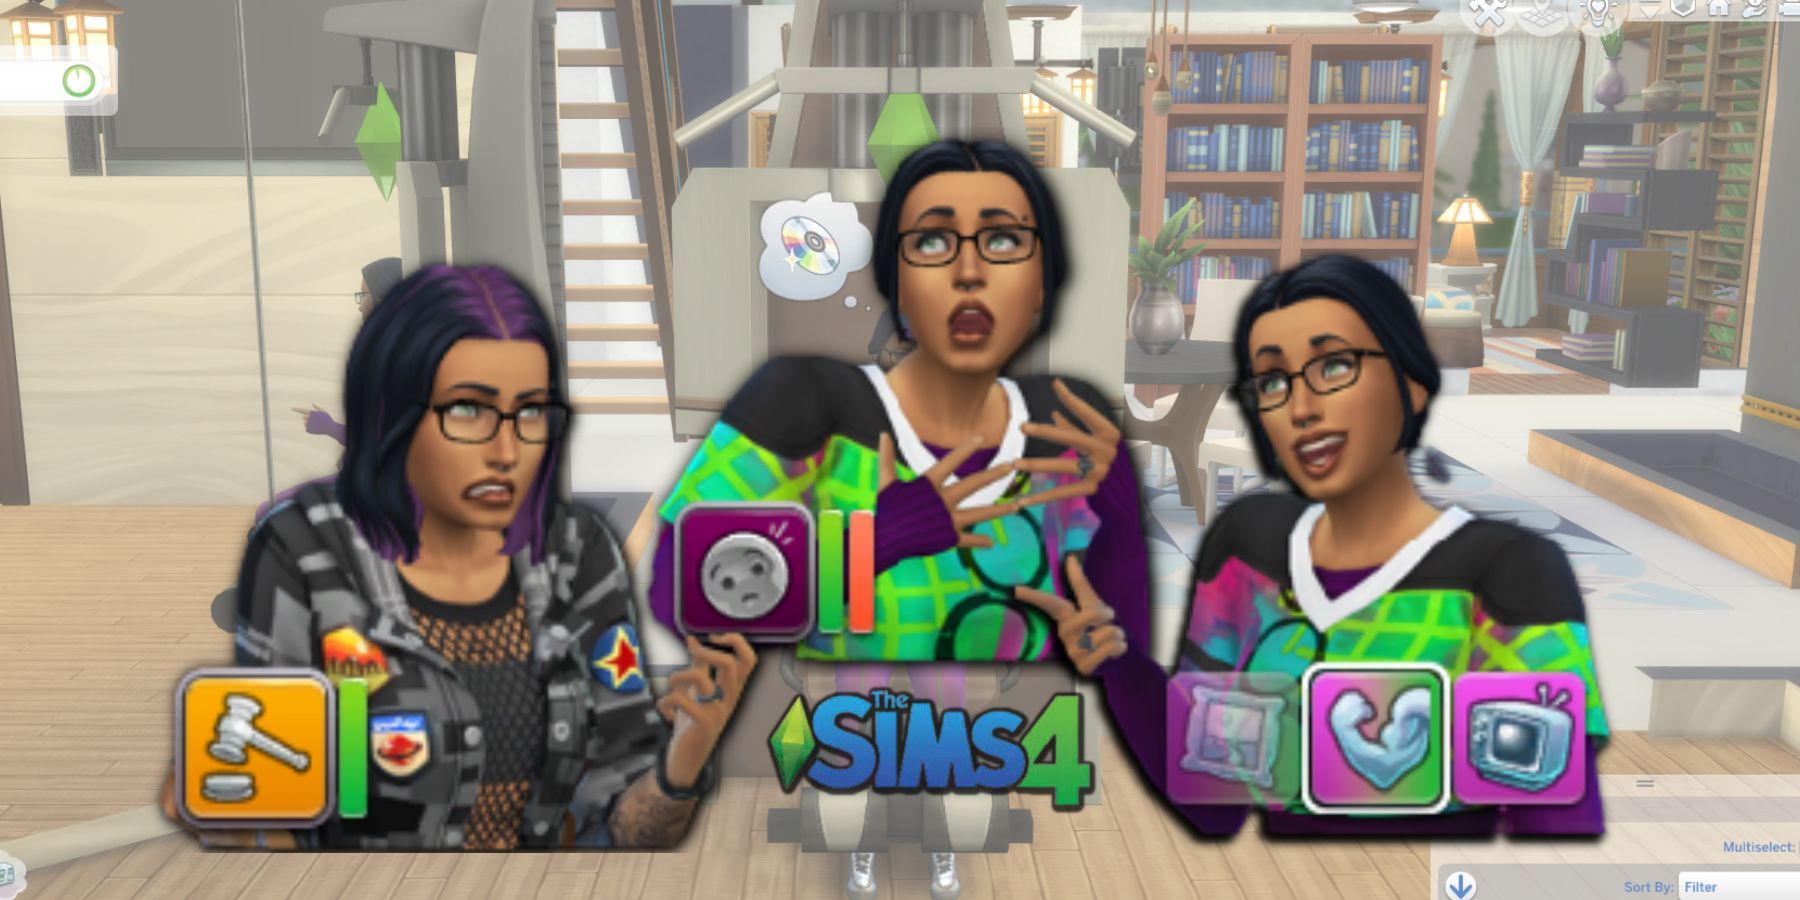 Sims 4: Fitness Stuff Review: Death Has Never Been So Boring